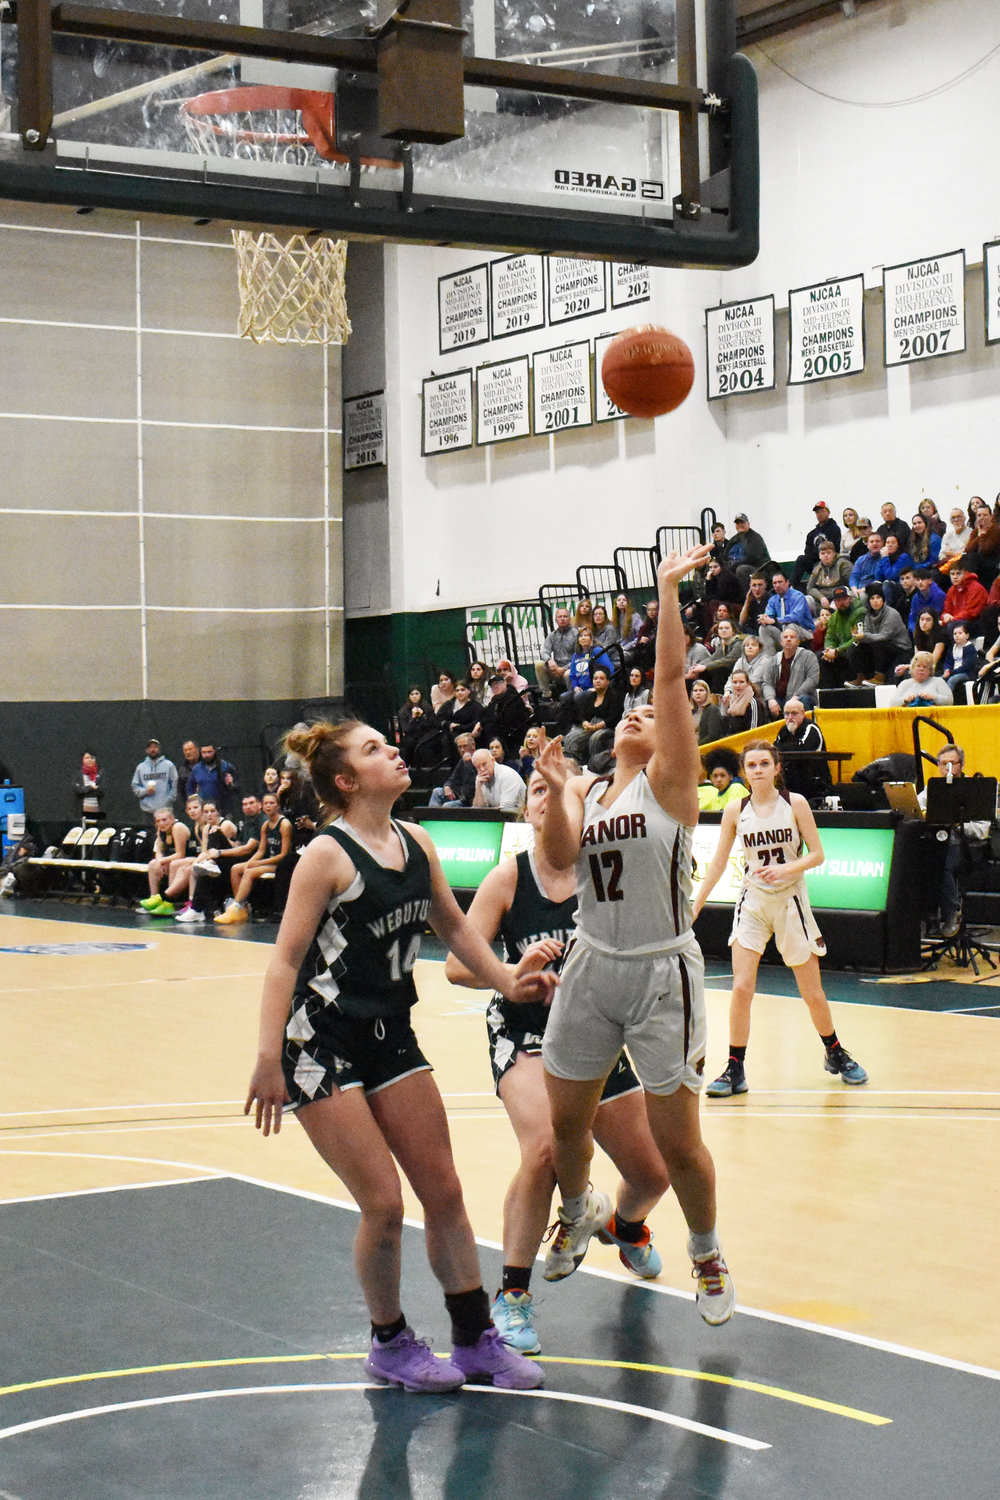 Jocelyn Mills represented Livingston Manor as a BCANY-OCIAA Girls Basketball All-League selection. Mills and the Lady Wildcats reached the Section IX Class D Championship this season.